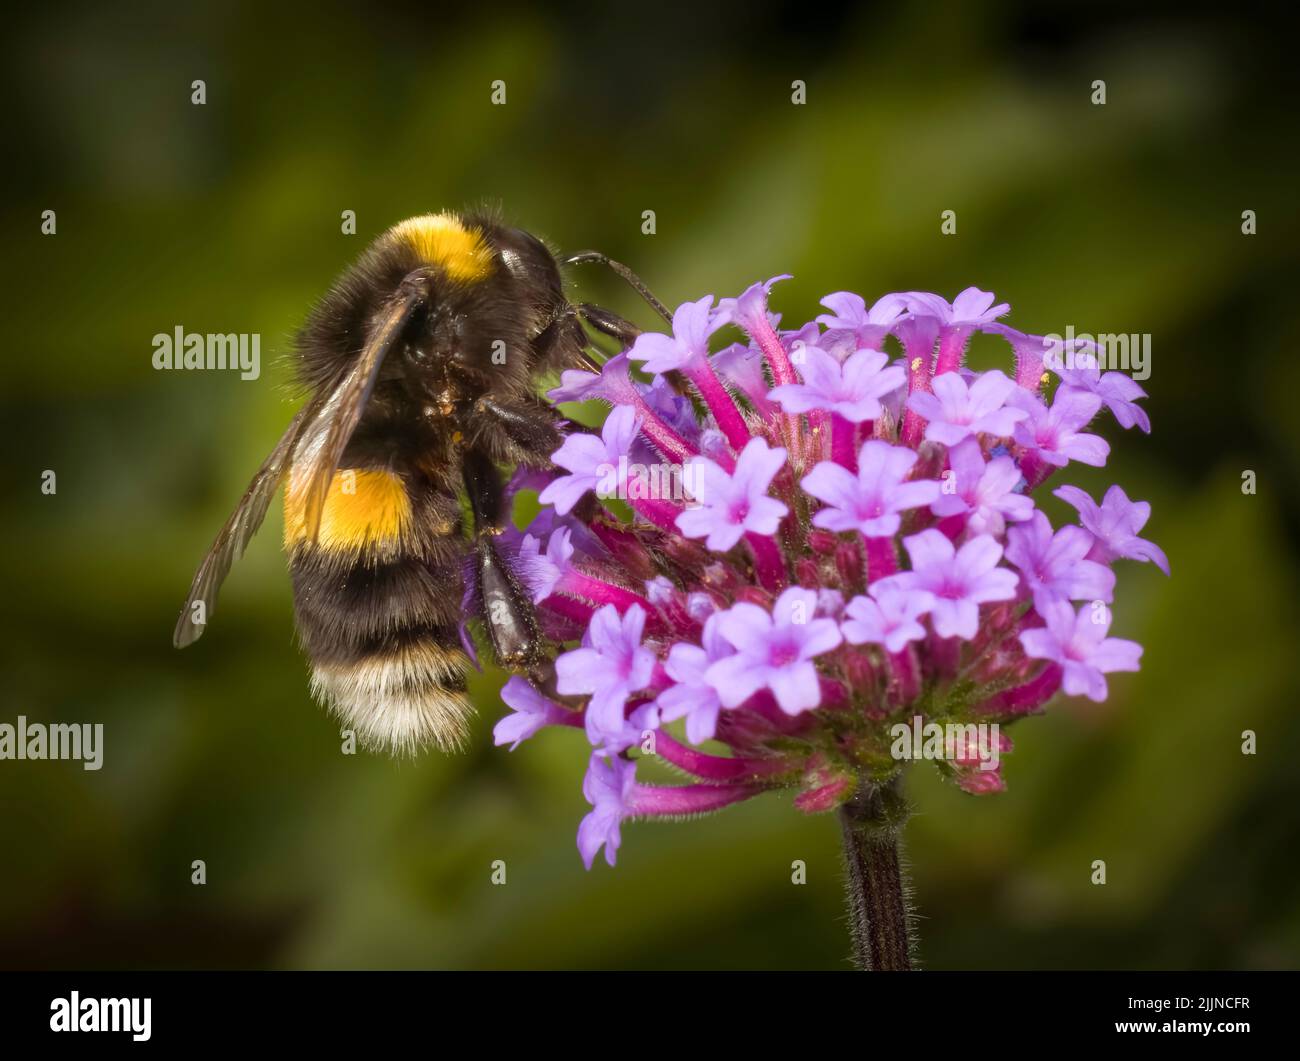 A White Tailed Bumble Bee pollenating a purple Verbena flower Stock Photo